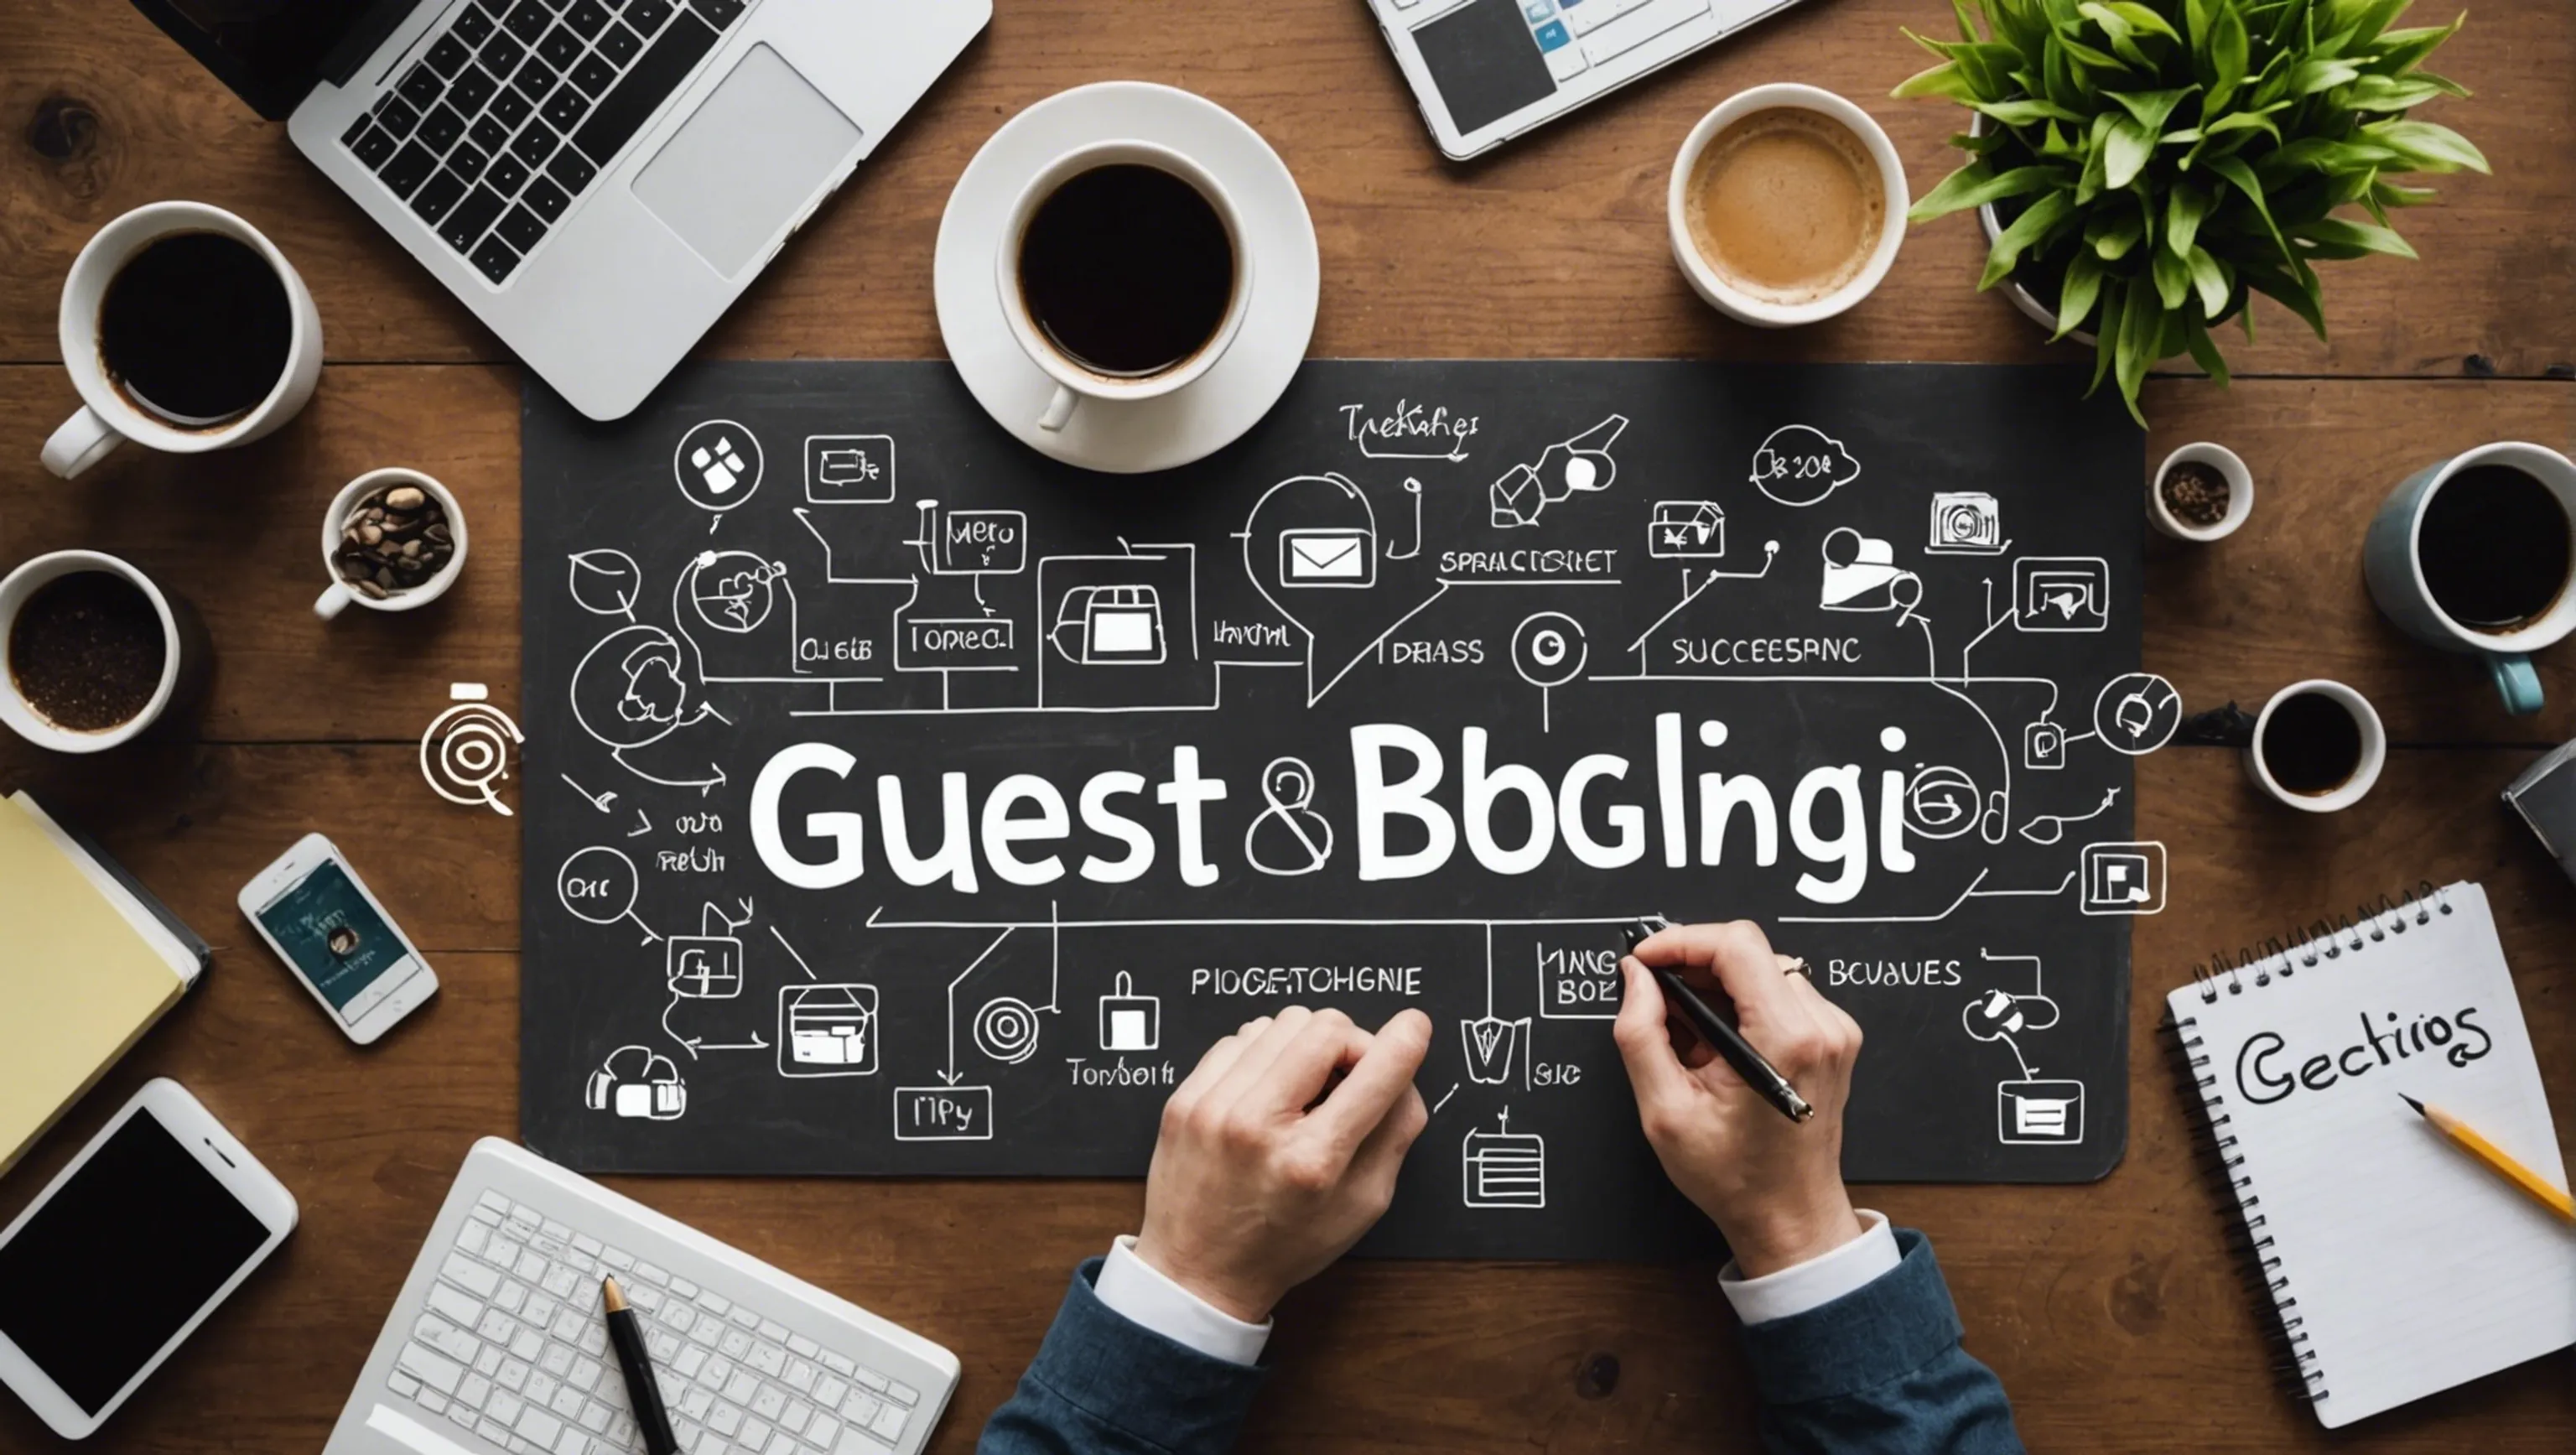 Tips for successful guest blogging